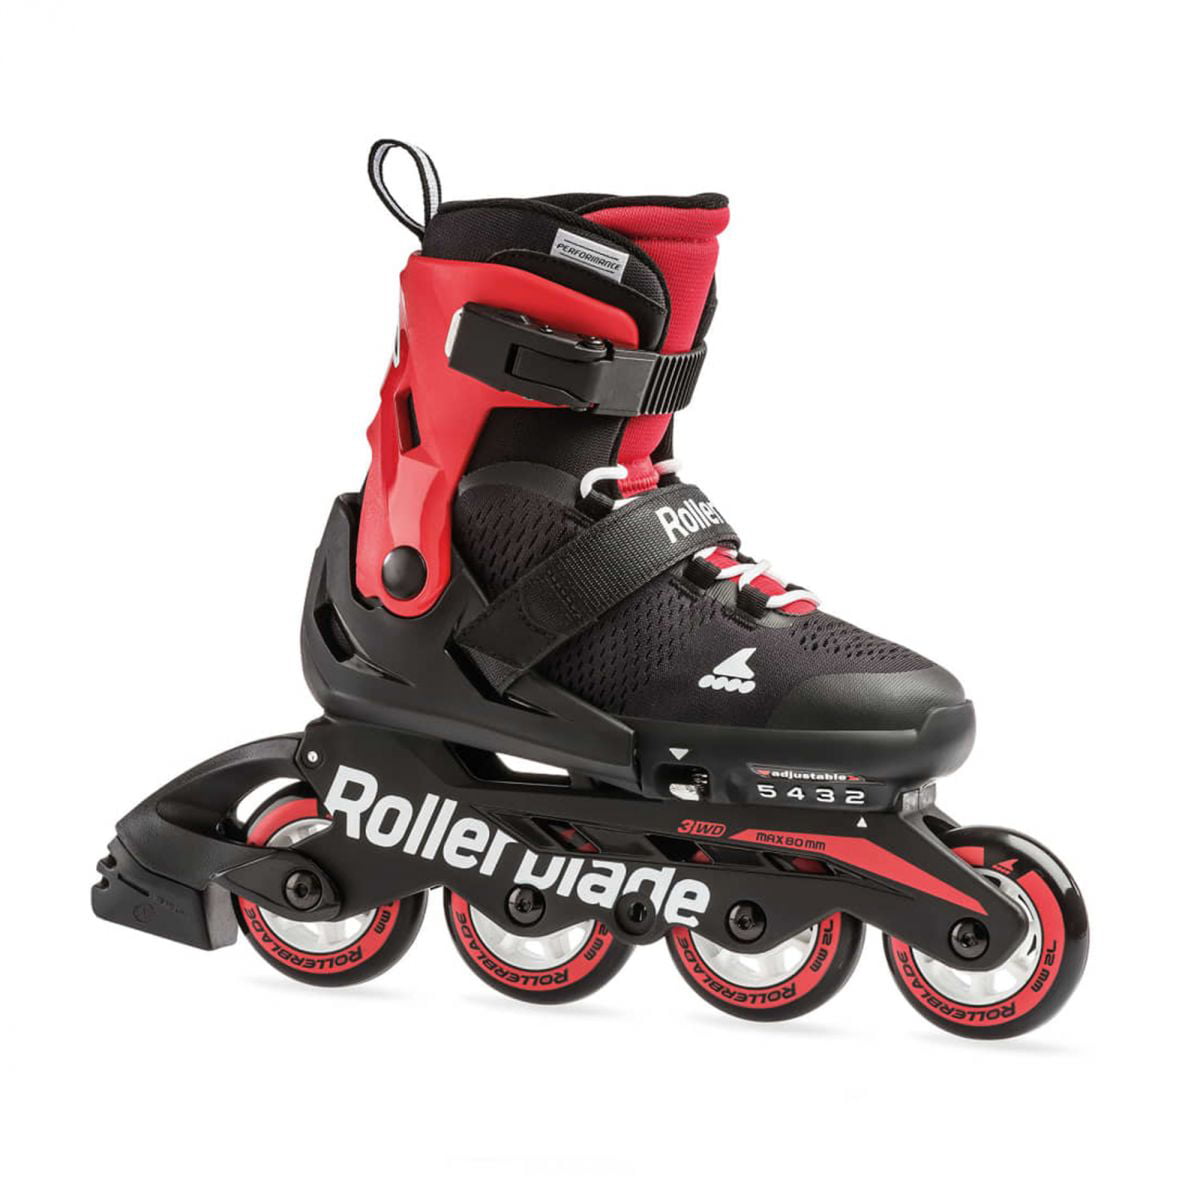 Rollerblade USA Microblade Unisex Adjustable Fitness Inline Skate, Large, Red